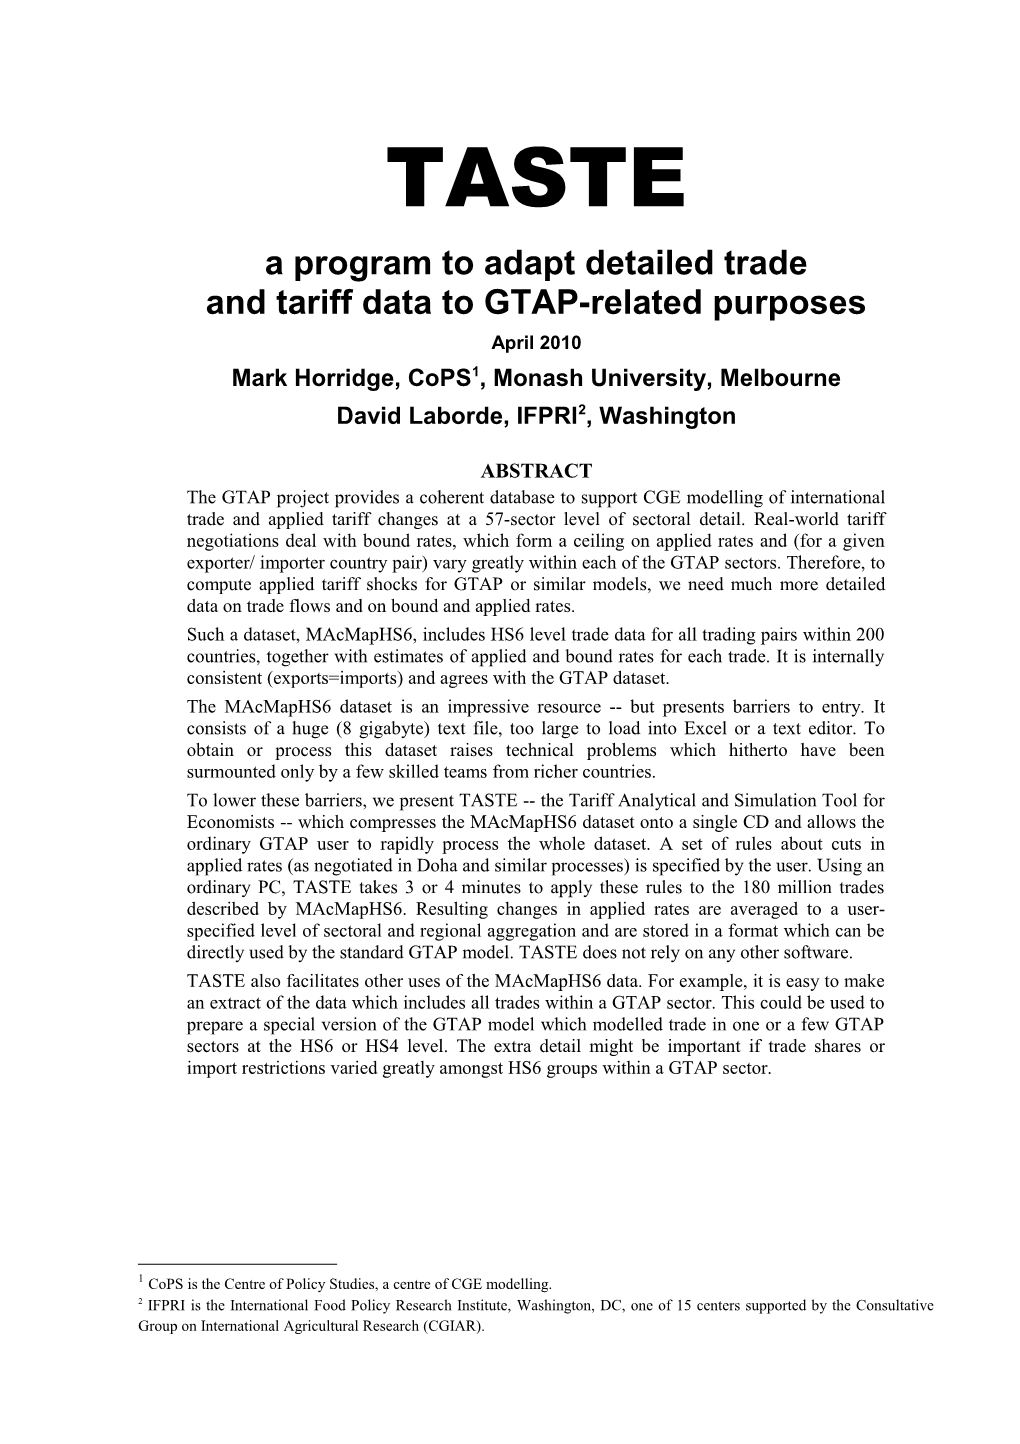 A Program to Adapt Detailed Trade and Tariff Data to GTAP-Related Purposes